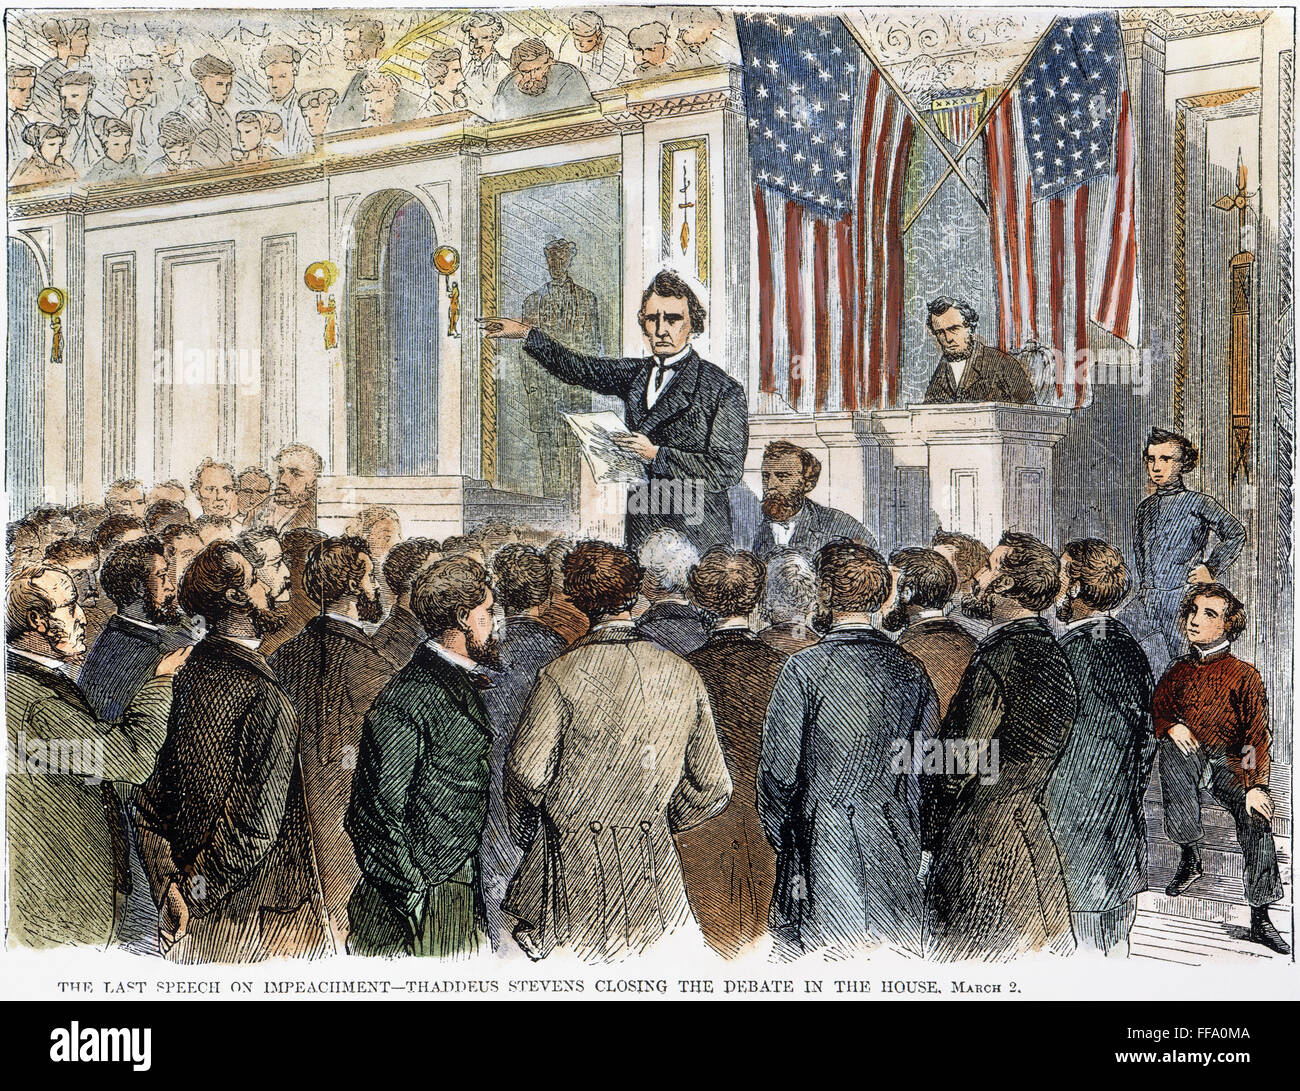 A. JOHNSON: IMPEACHMENT. /nCongressman Thaddeus Stevens (1792-1868) closing the debate in the House of Representatives on the proposed impeachment of President Andrew Johnson, 2 March 1868: colored wood engraving from a contemporary American newspaper. Stock Photo